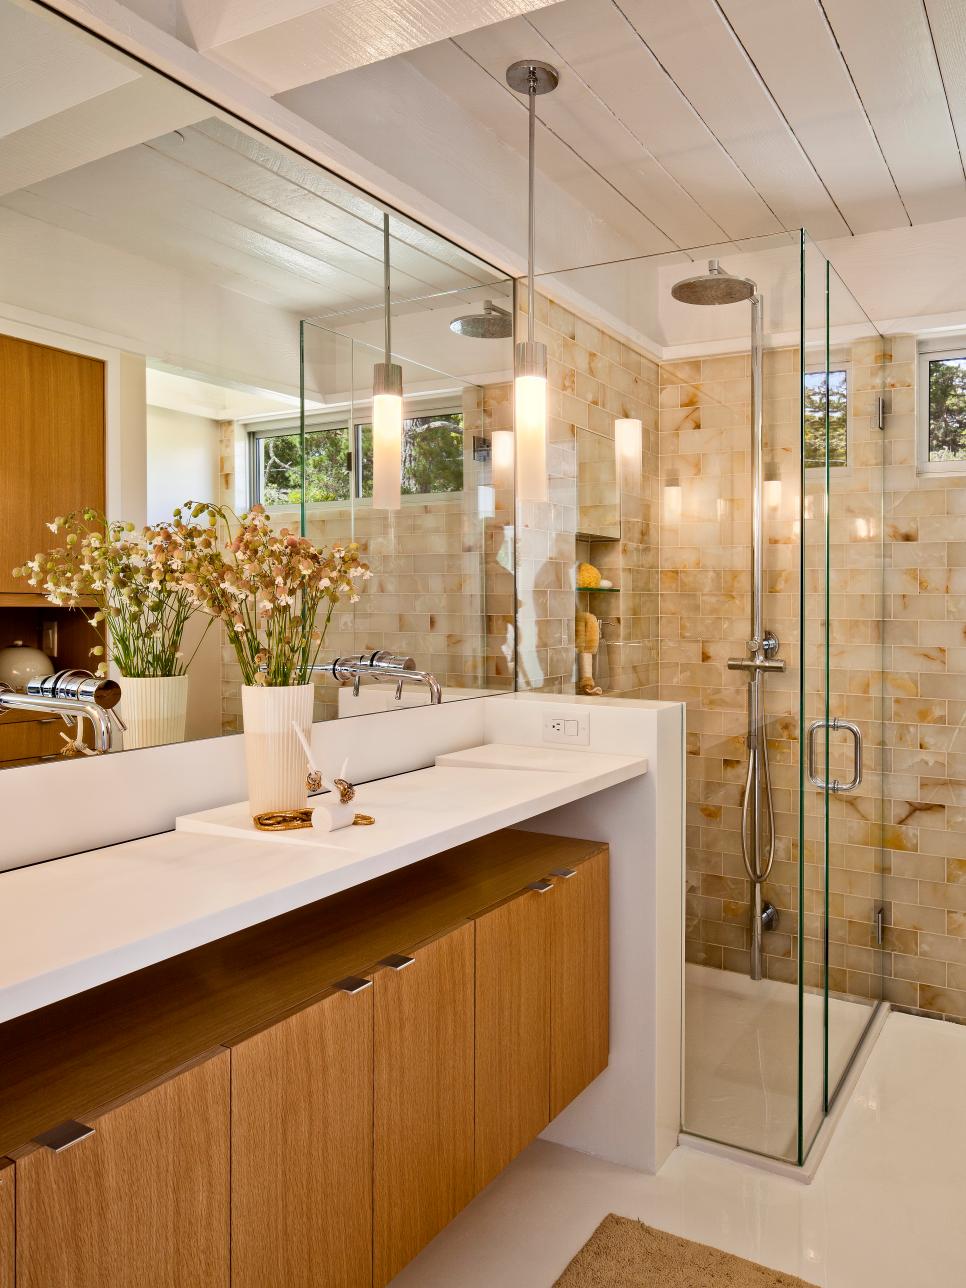 Bathroom With Neutral Tile Walls, Contemporary Vanity and Glass Shower